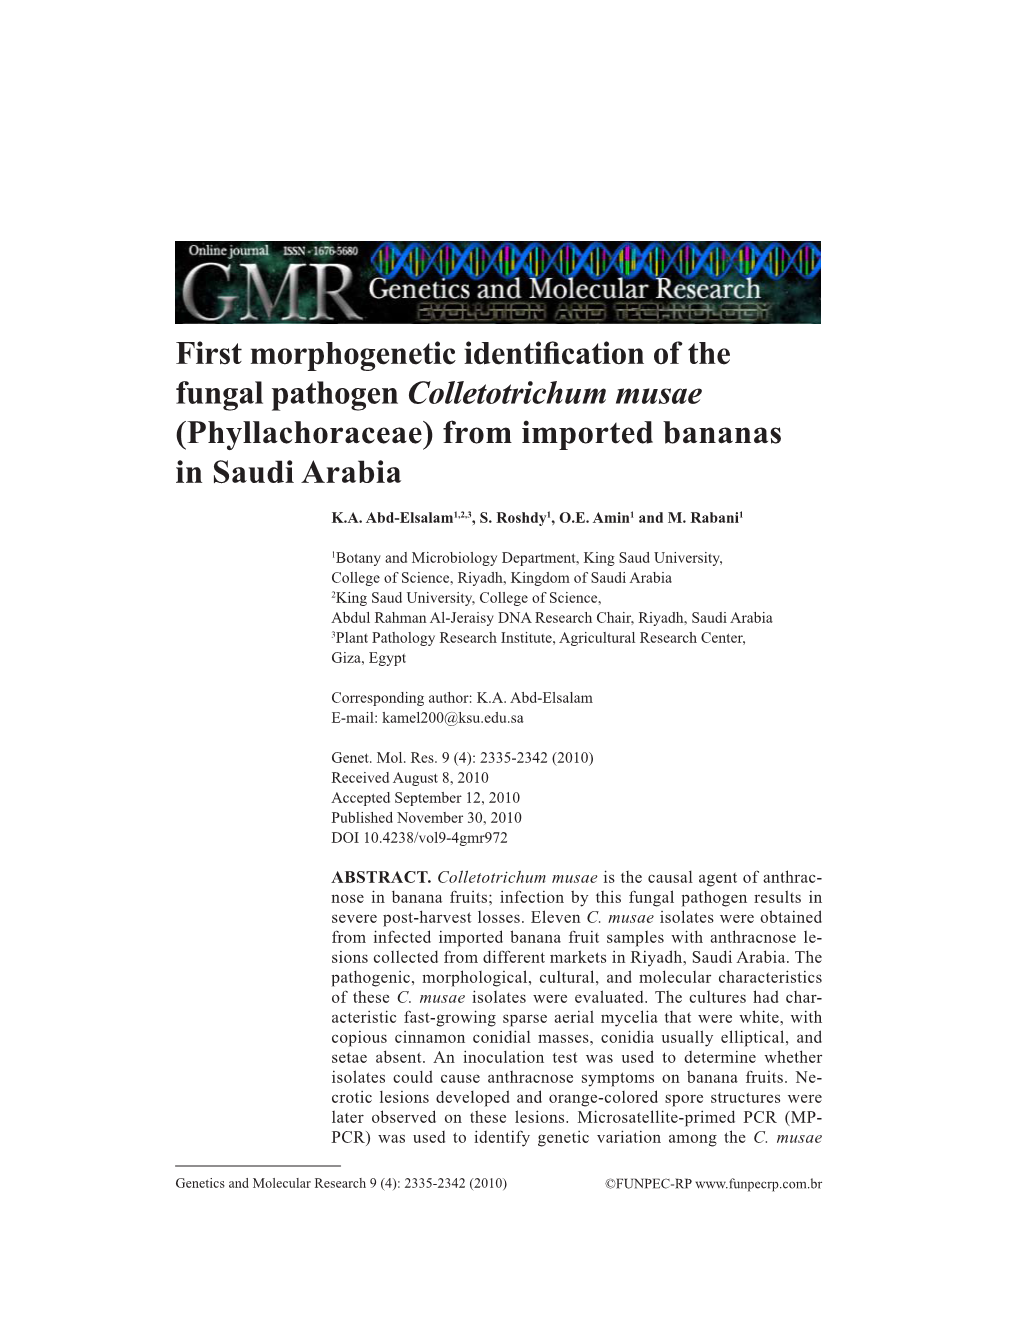 First Morphogenetic Identification of the Fungal Pathogen Colletotrichum Musae (Phyllachoraceae) from Imported Bananas in Saudi Arabia